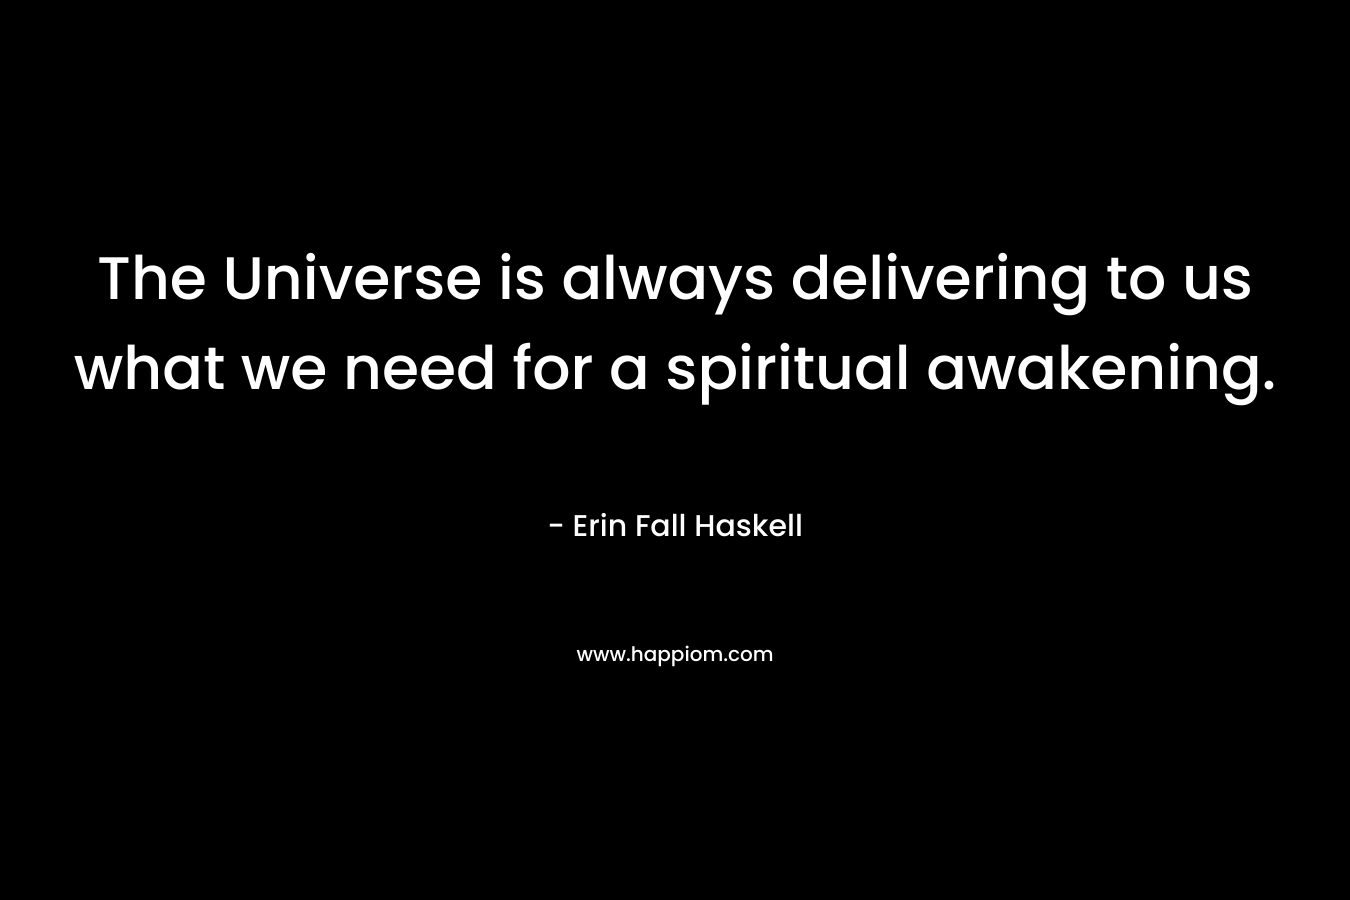 The Universe is always delivering to us what we need for a spiritual awakening. – Erin Fall Haskell